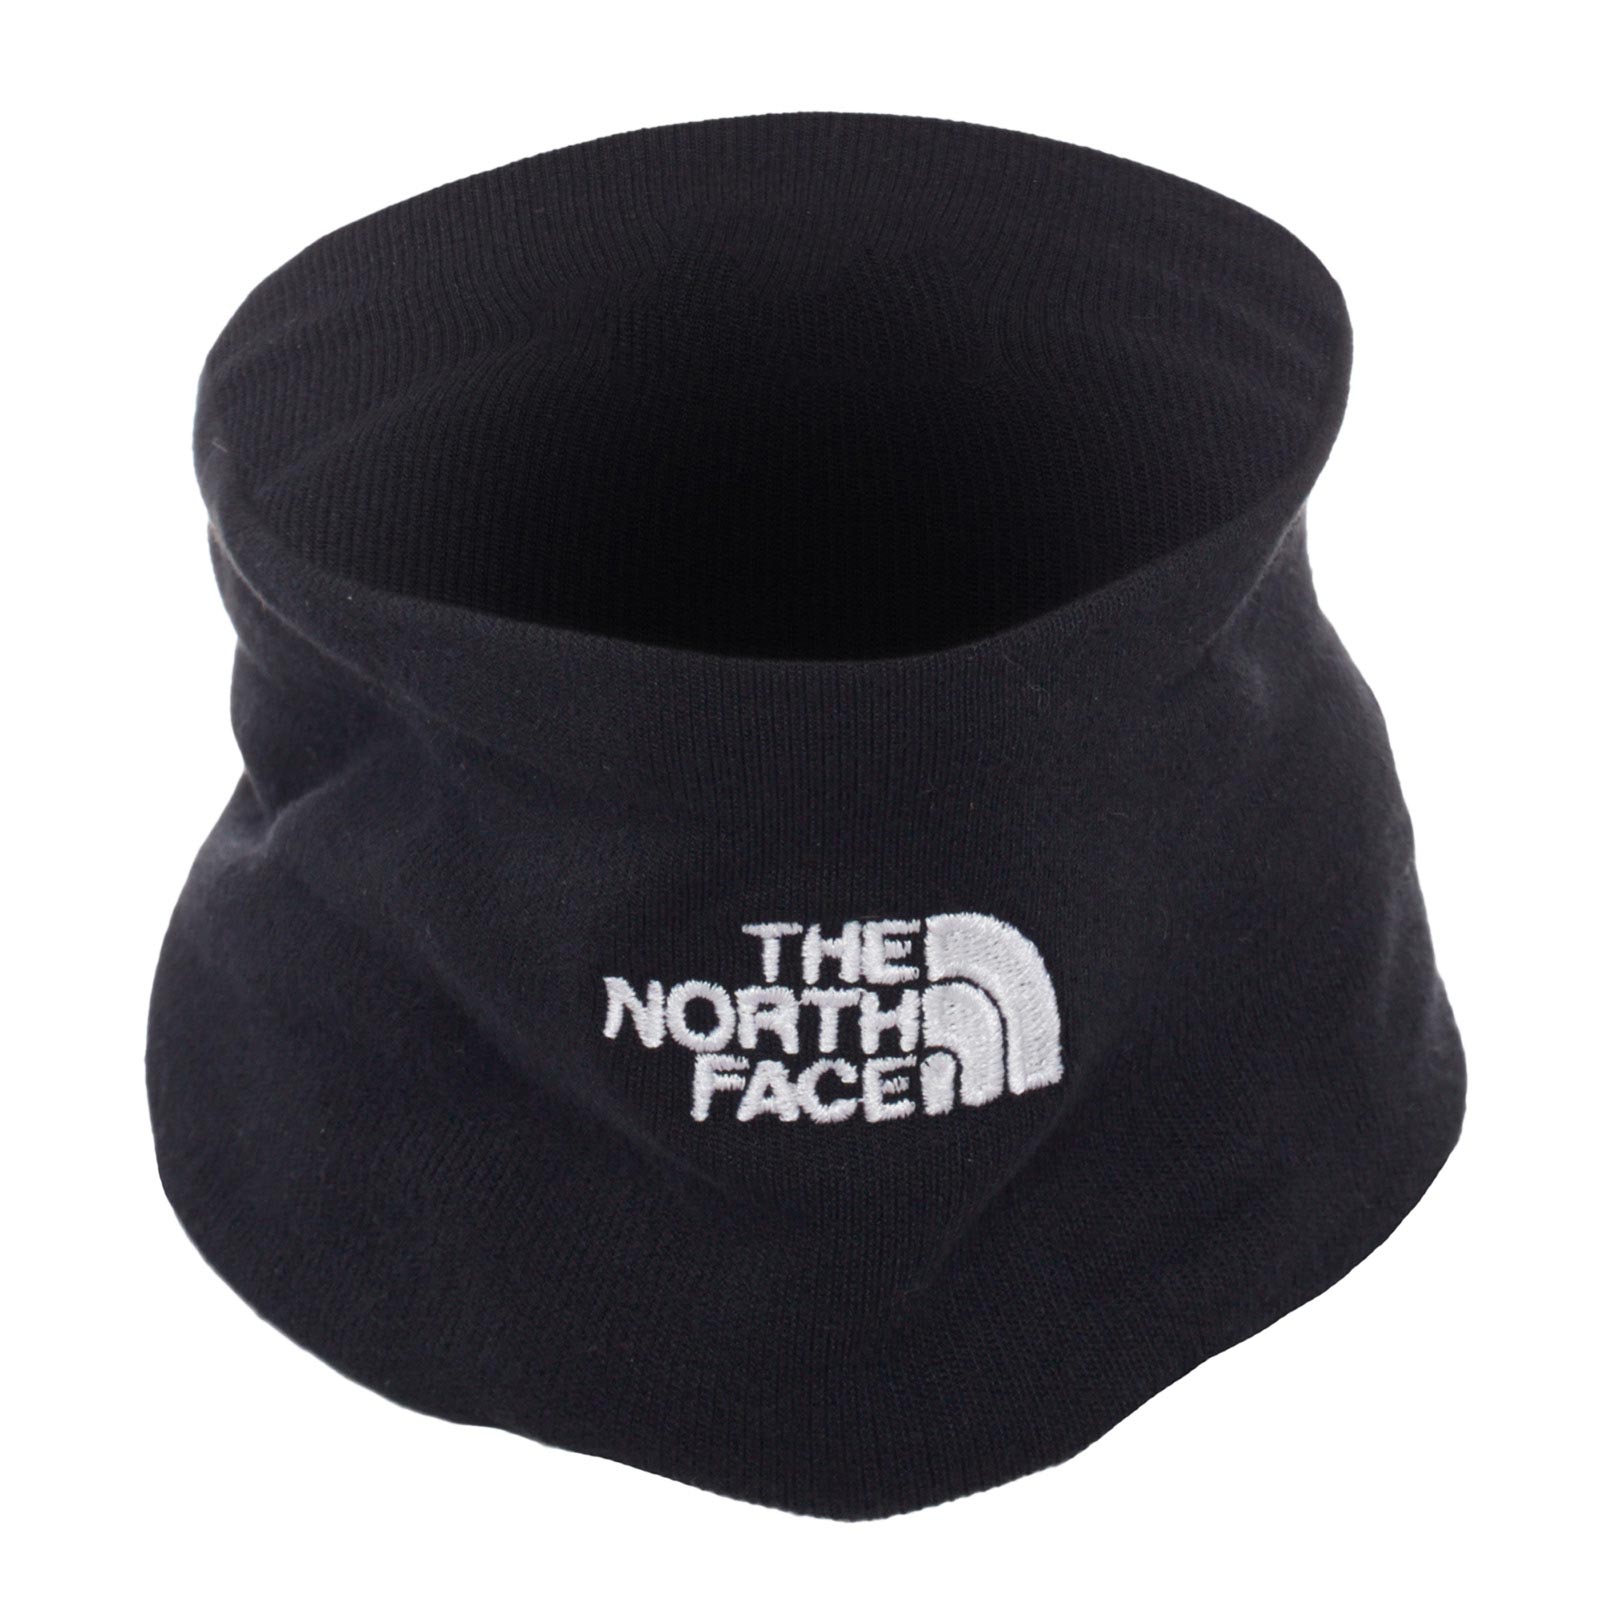 THE NORTH FACE WINTER SEAMLESS REVERSIBLE NECK WARMER